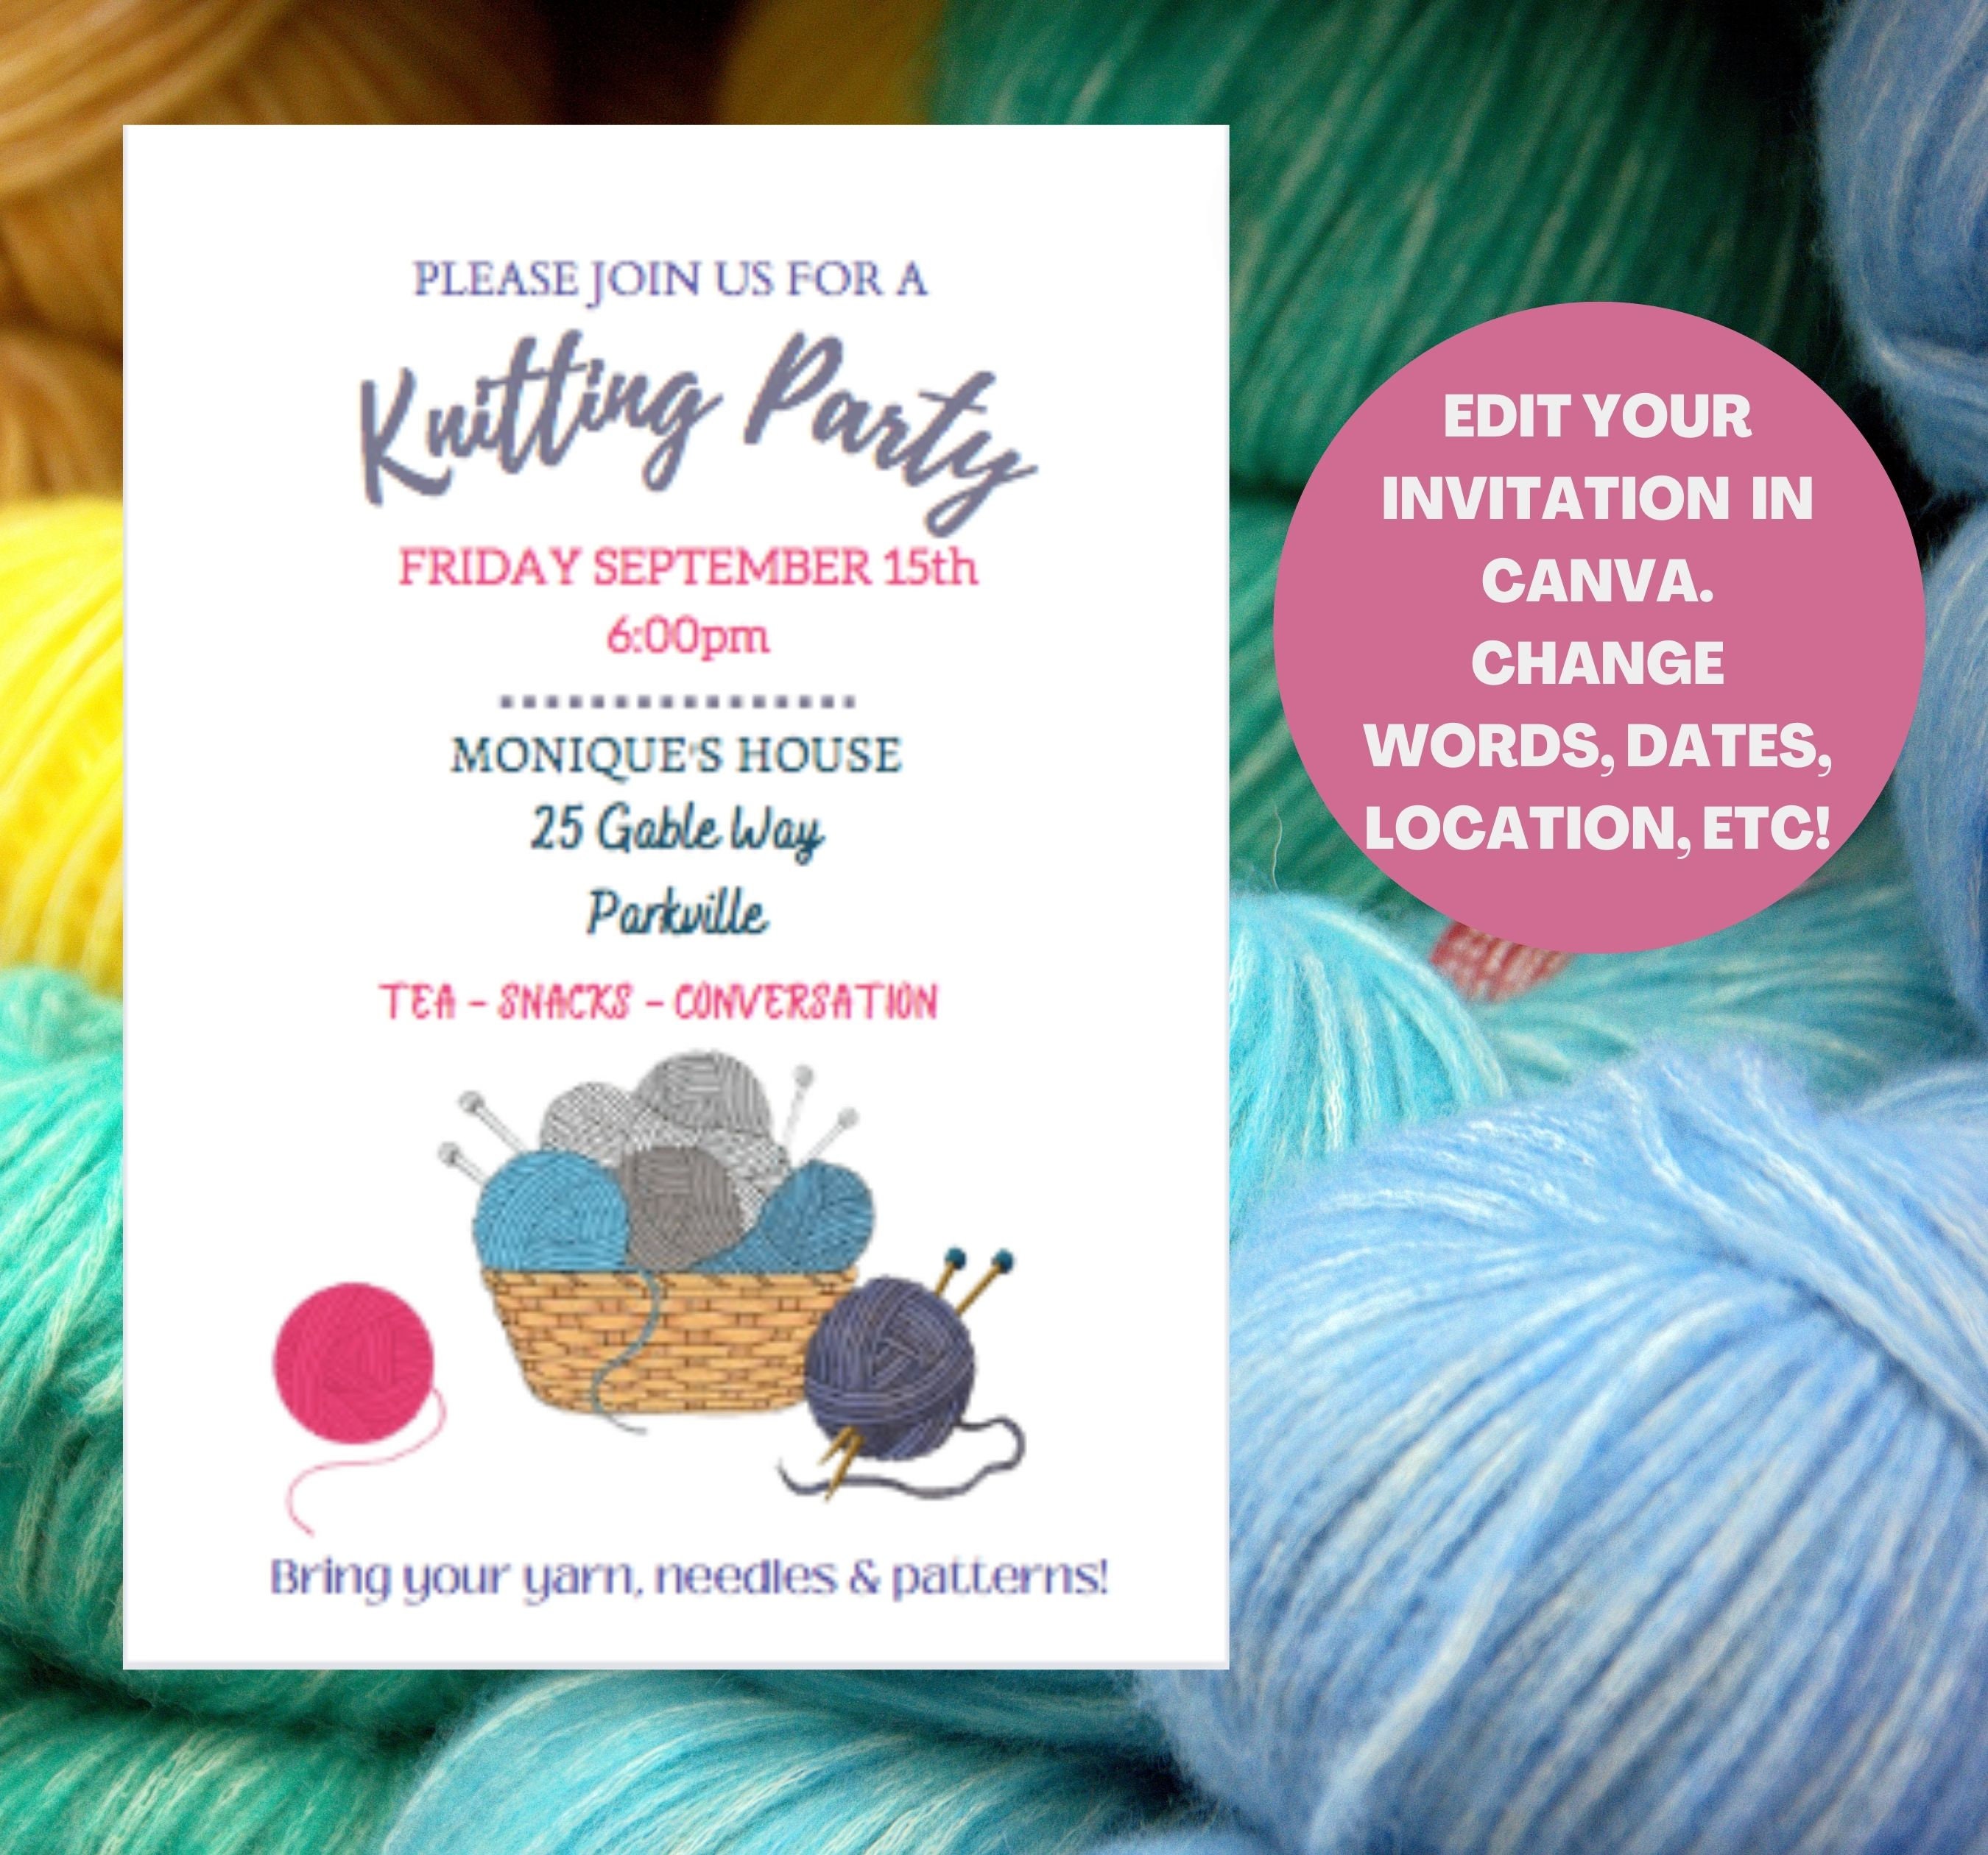 YARN, an invitation to the pants party.